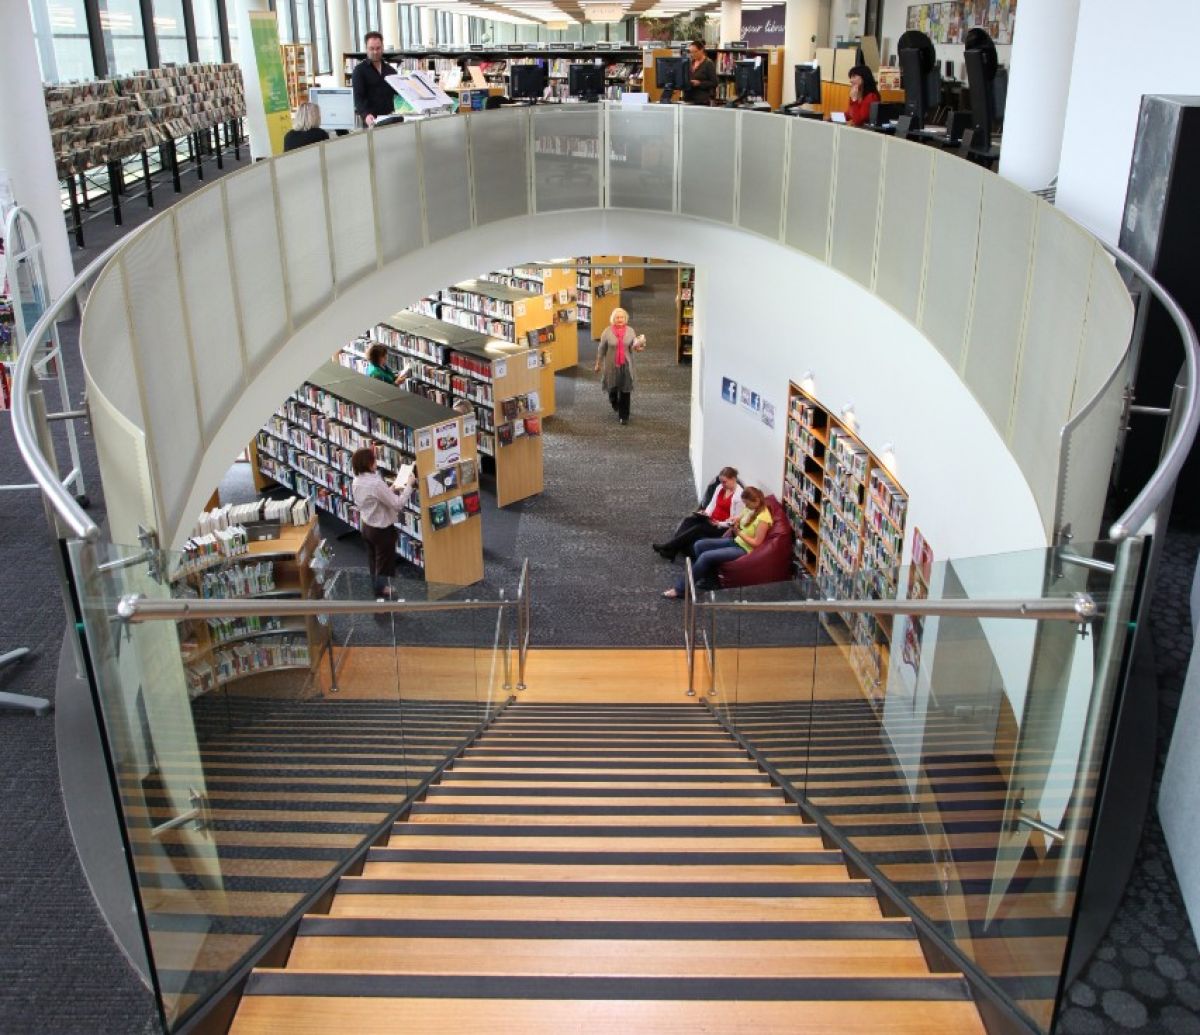 inside library with stairs